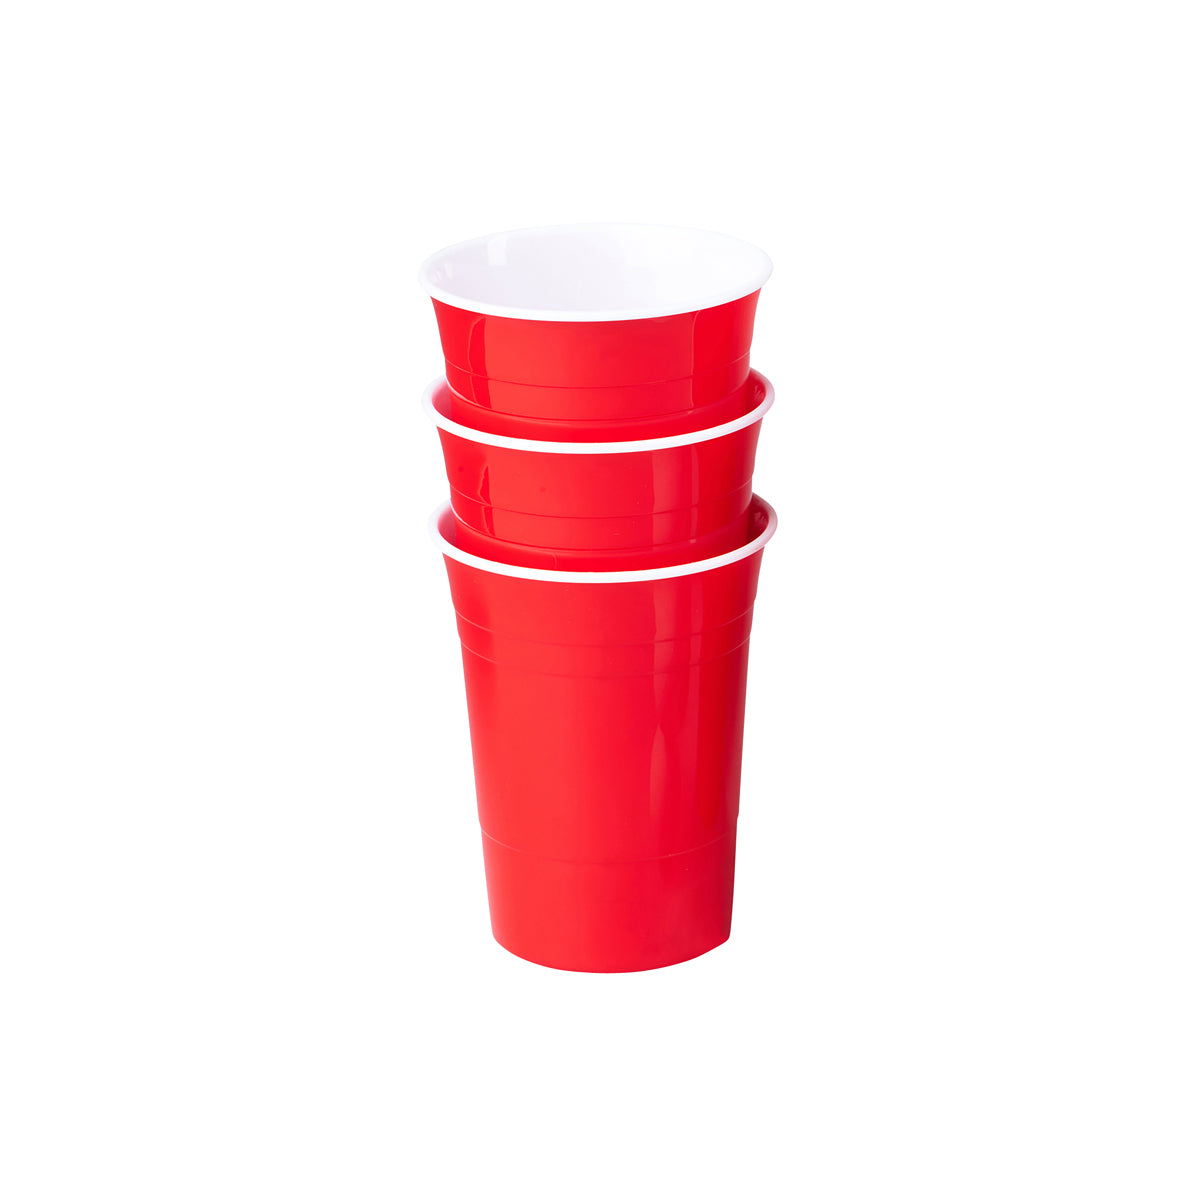 RCRE425RD3-12 Redds Redds Big Red Cup 425ml Tomkin Australia Hospitality Supplies